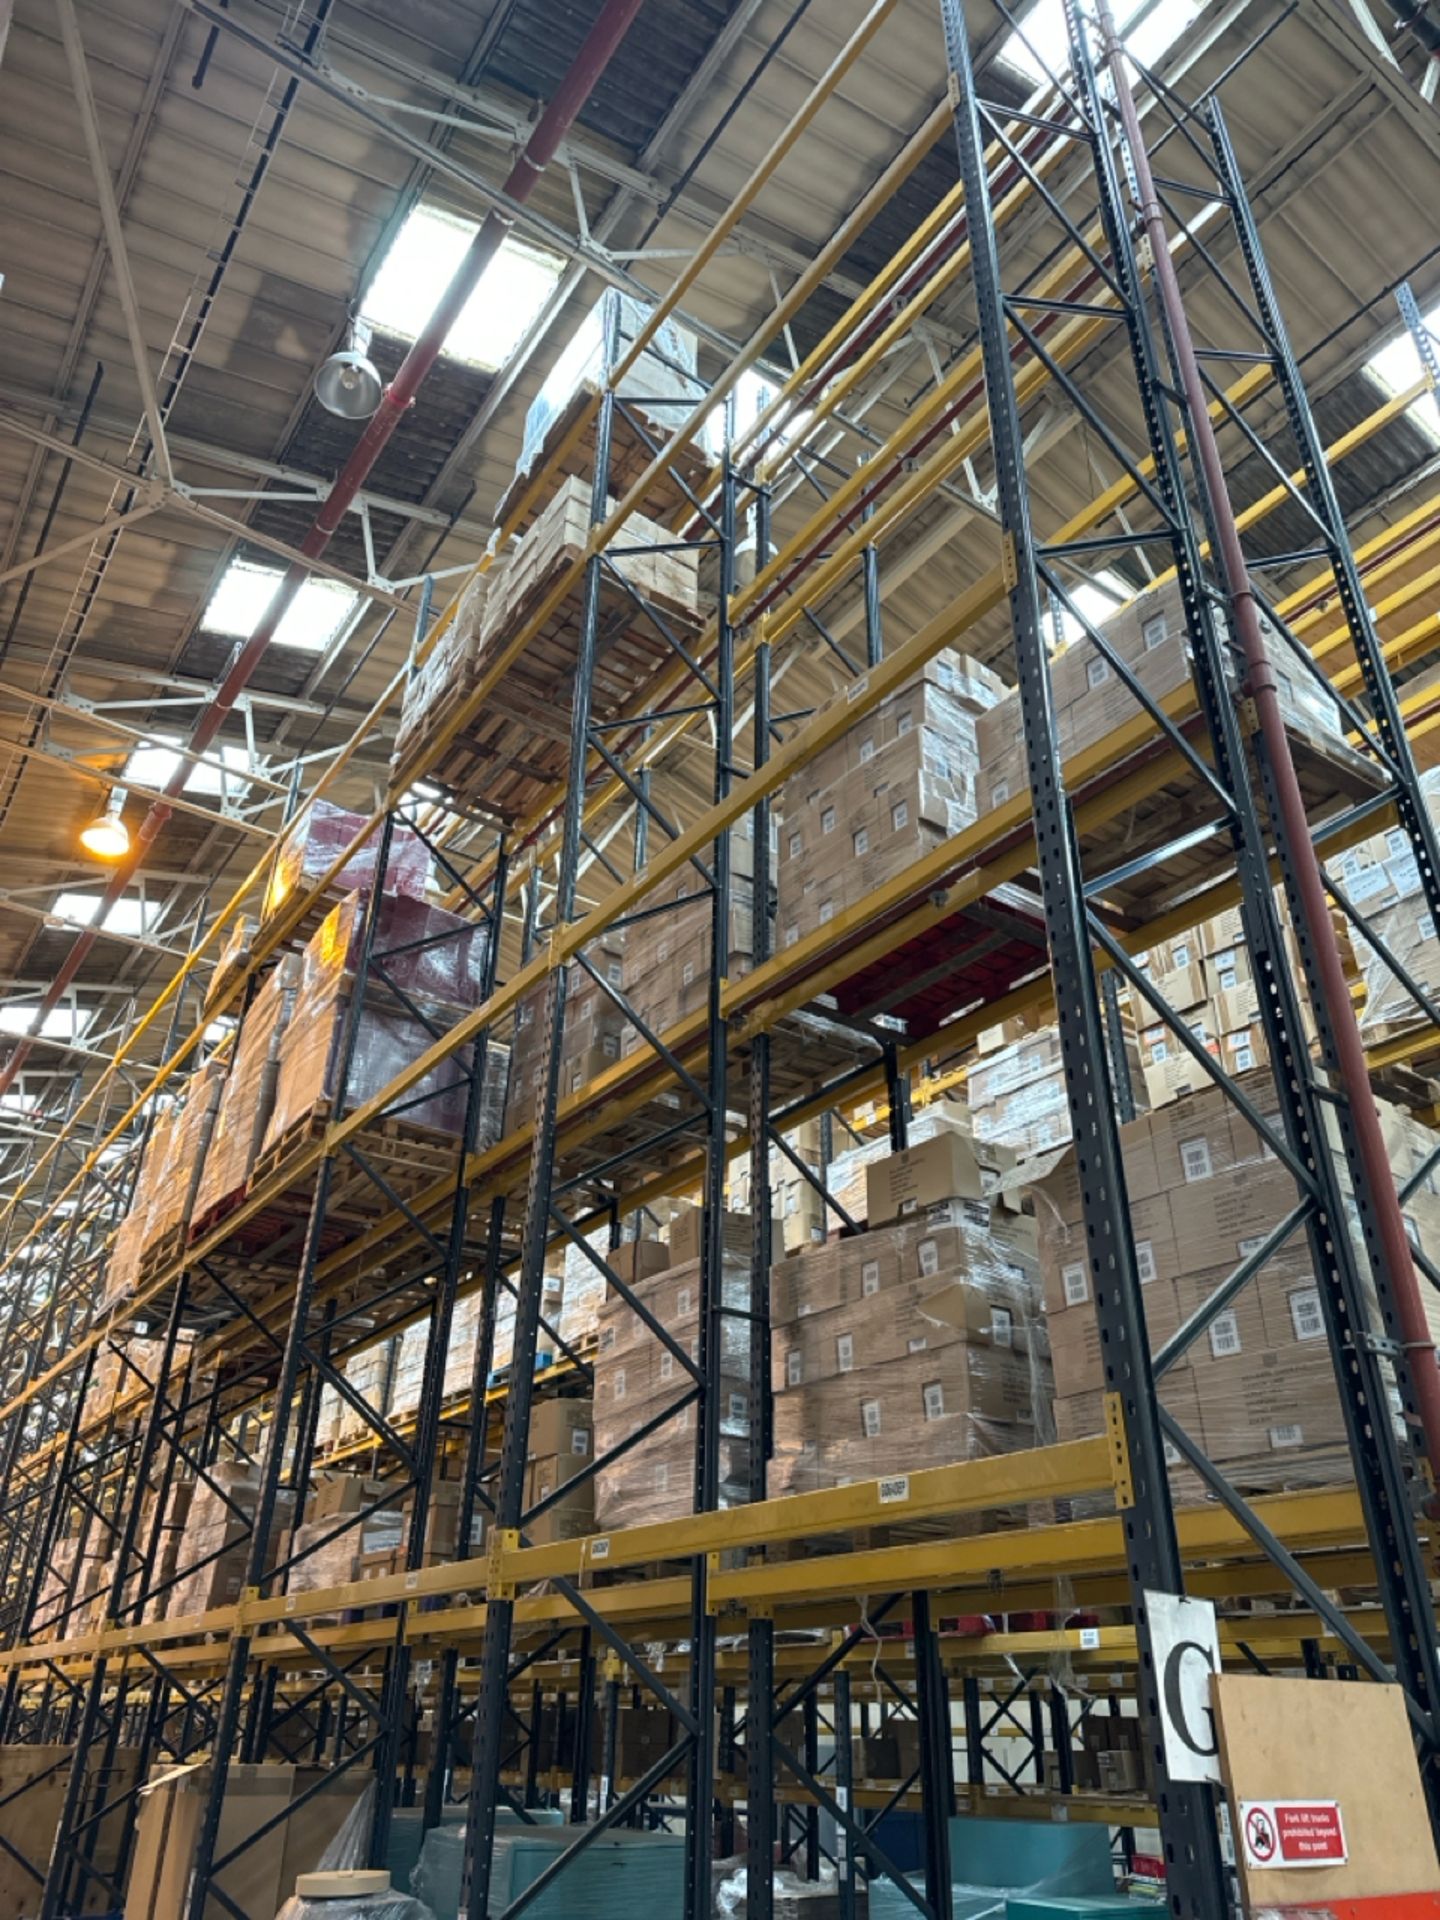 Run Of 23 Bays Of Back To Back Boltless Industrial Pallet Racking - Image 6 of 12